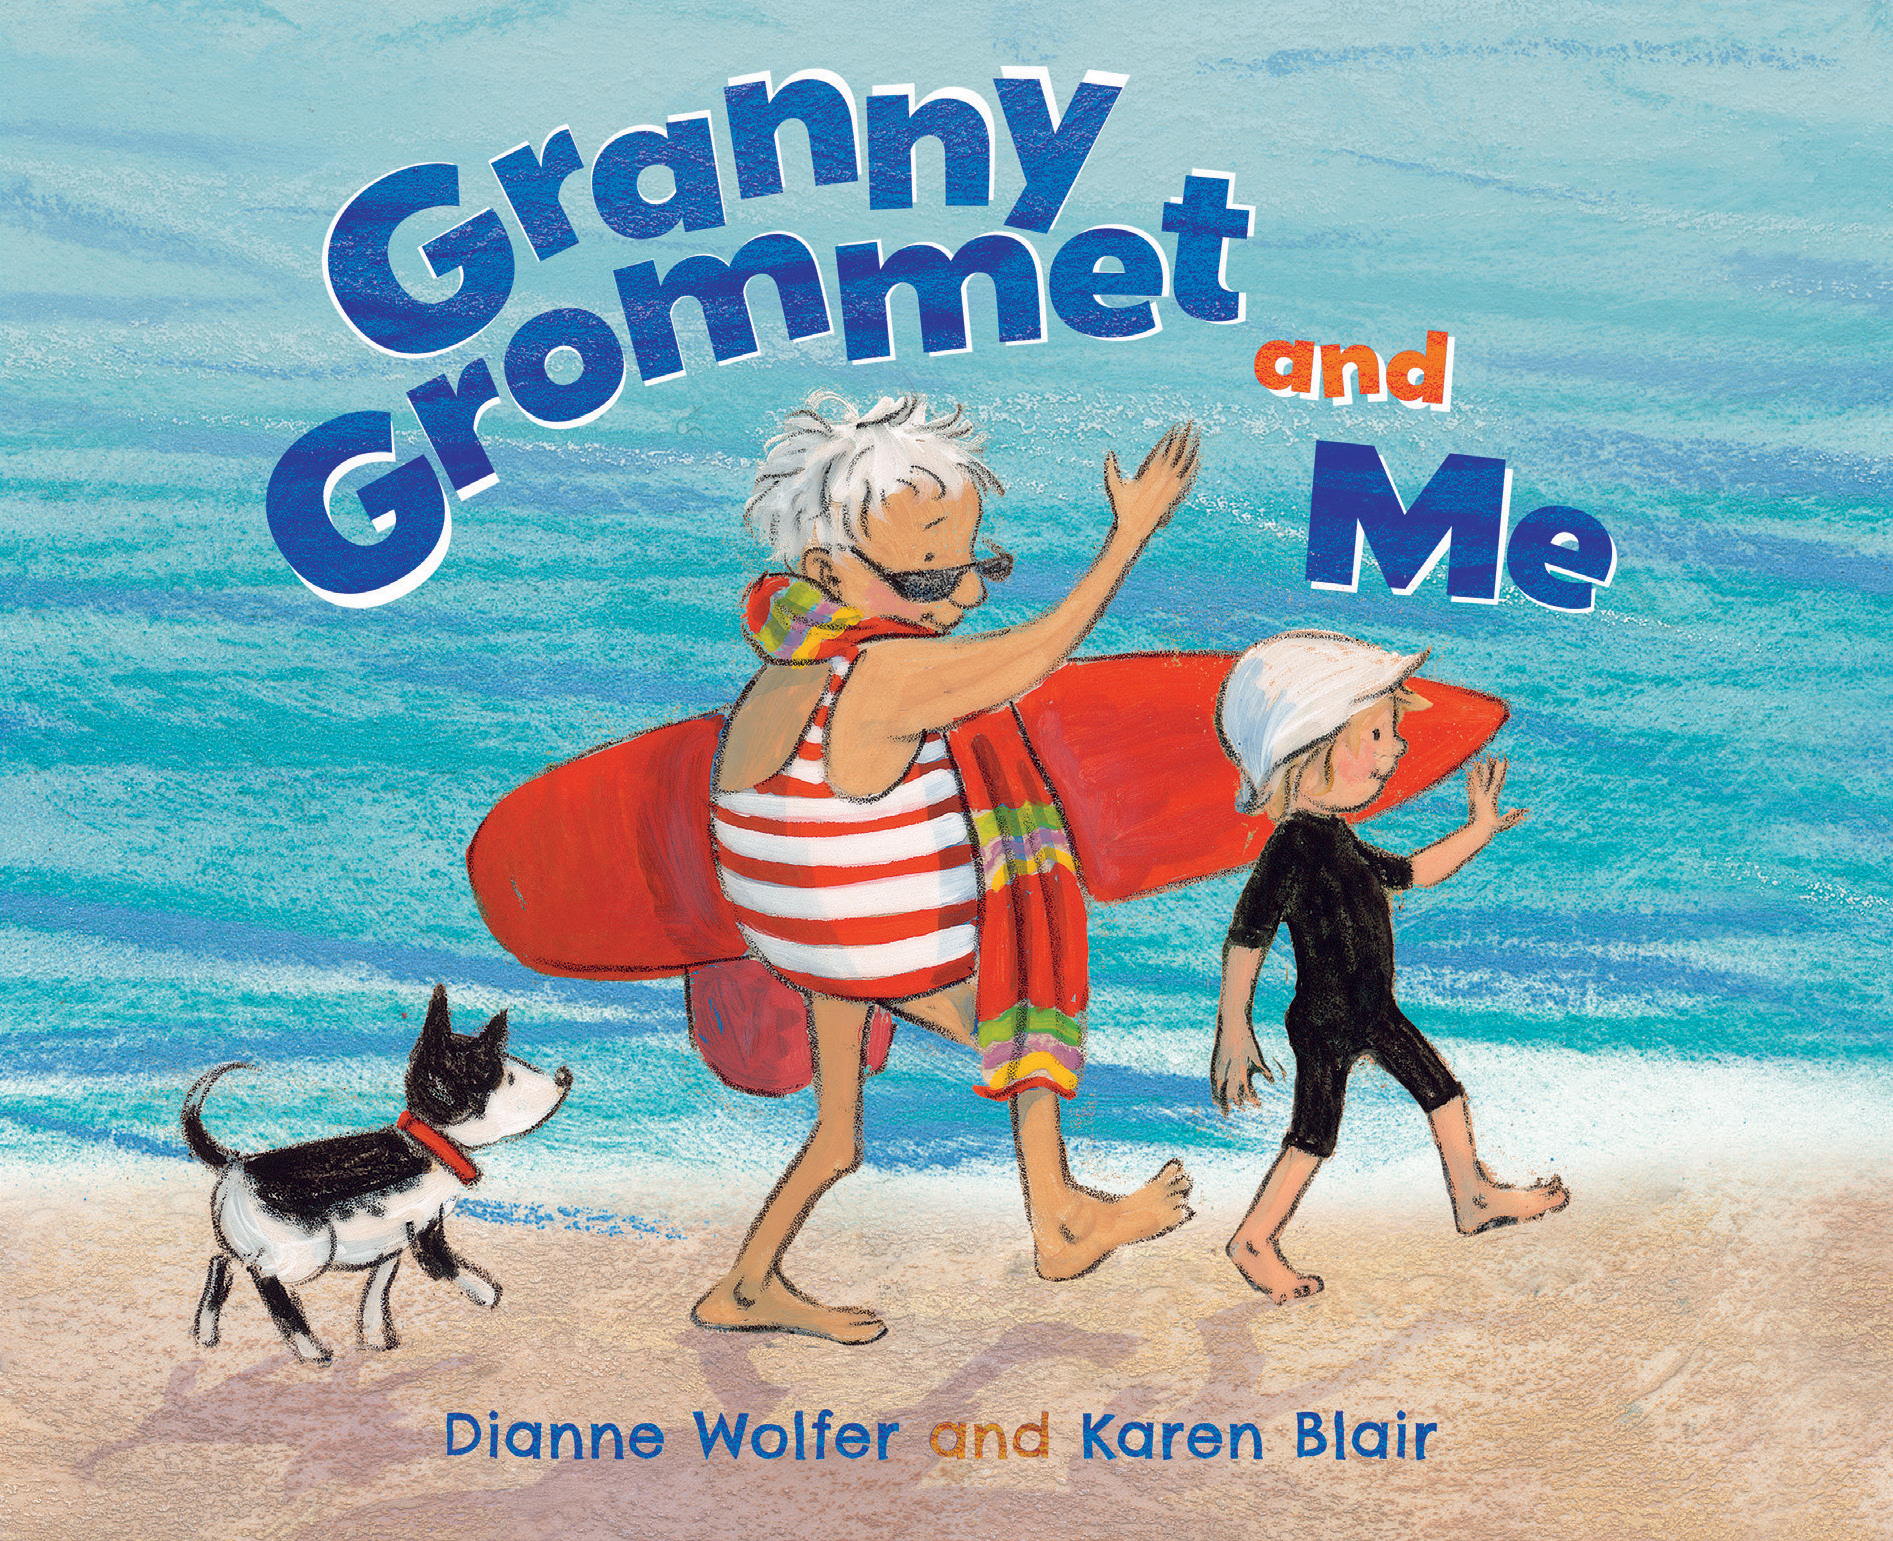 book cover image of granny grommet and me